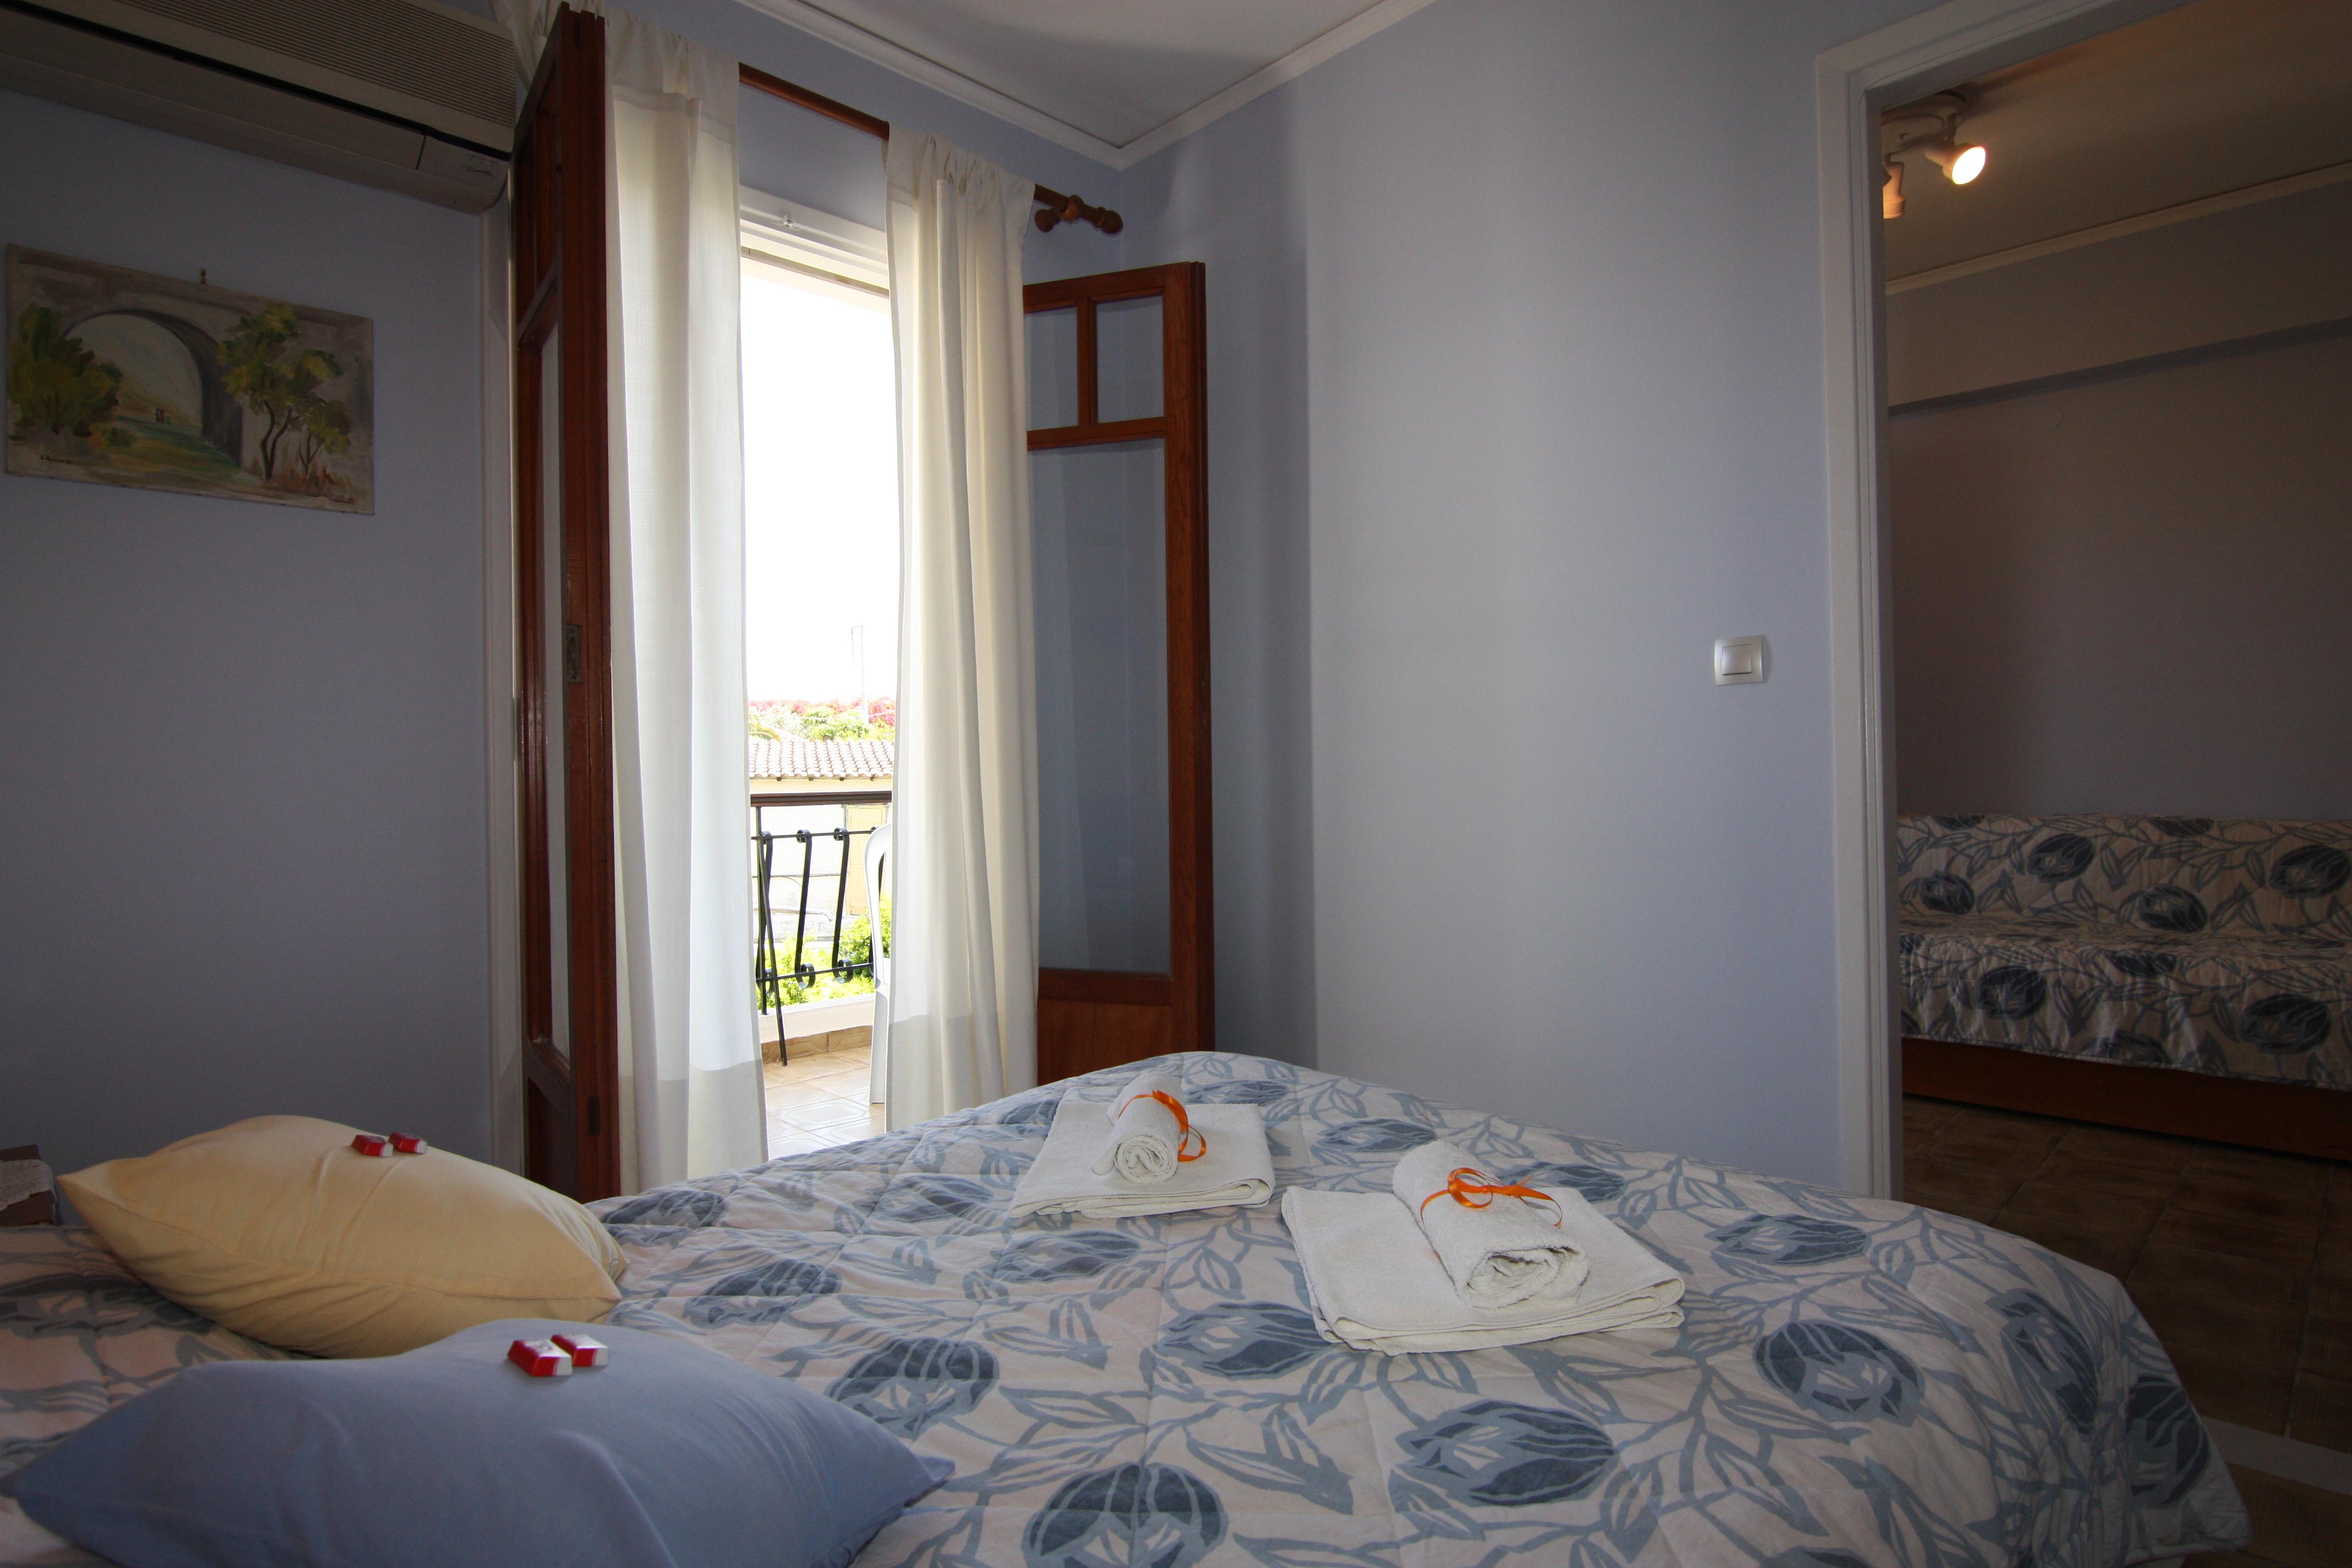 Cozy and romantic apartments for couples in Tolon next to the sandy beach